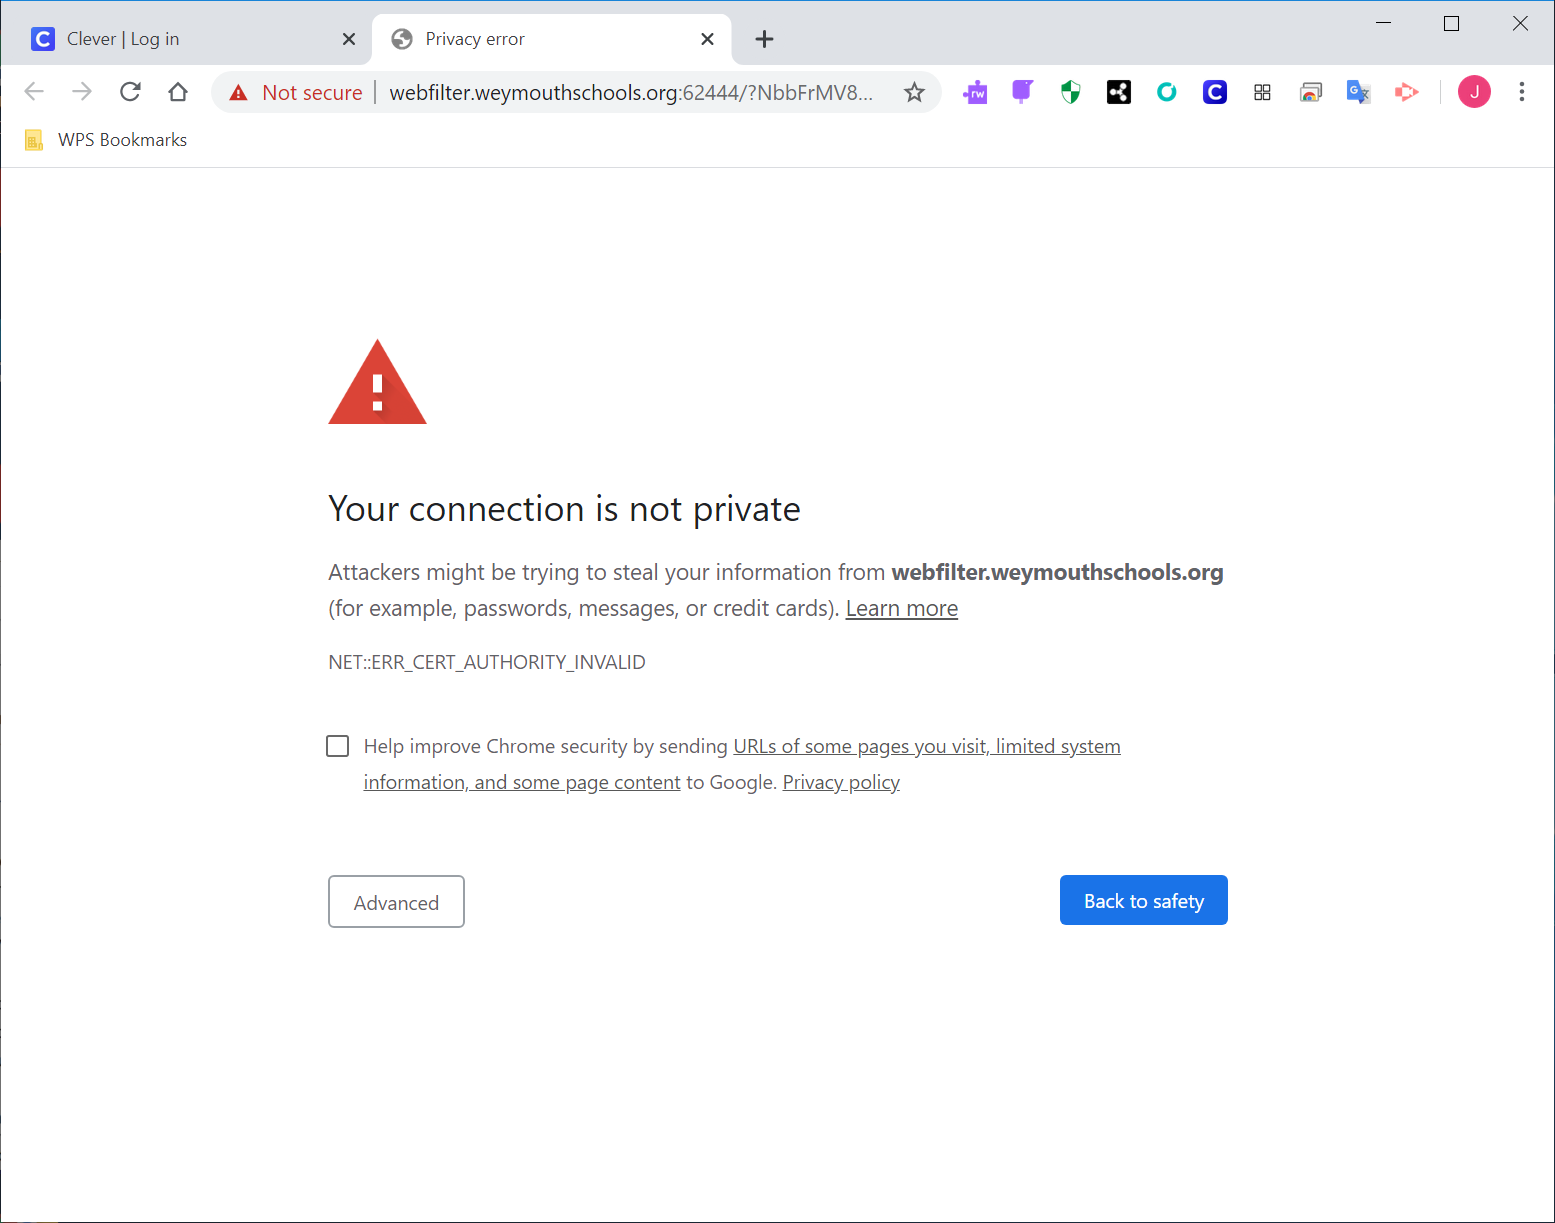 Chrome: Your connection is not private. CERT AUTHORITY INVALID